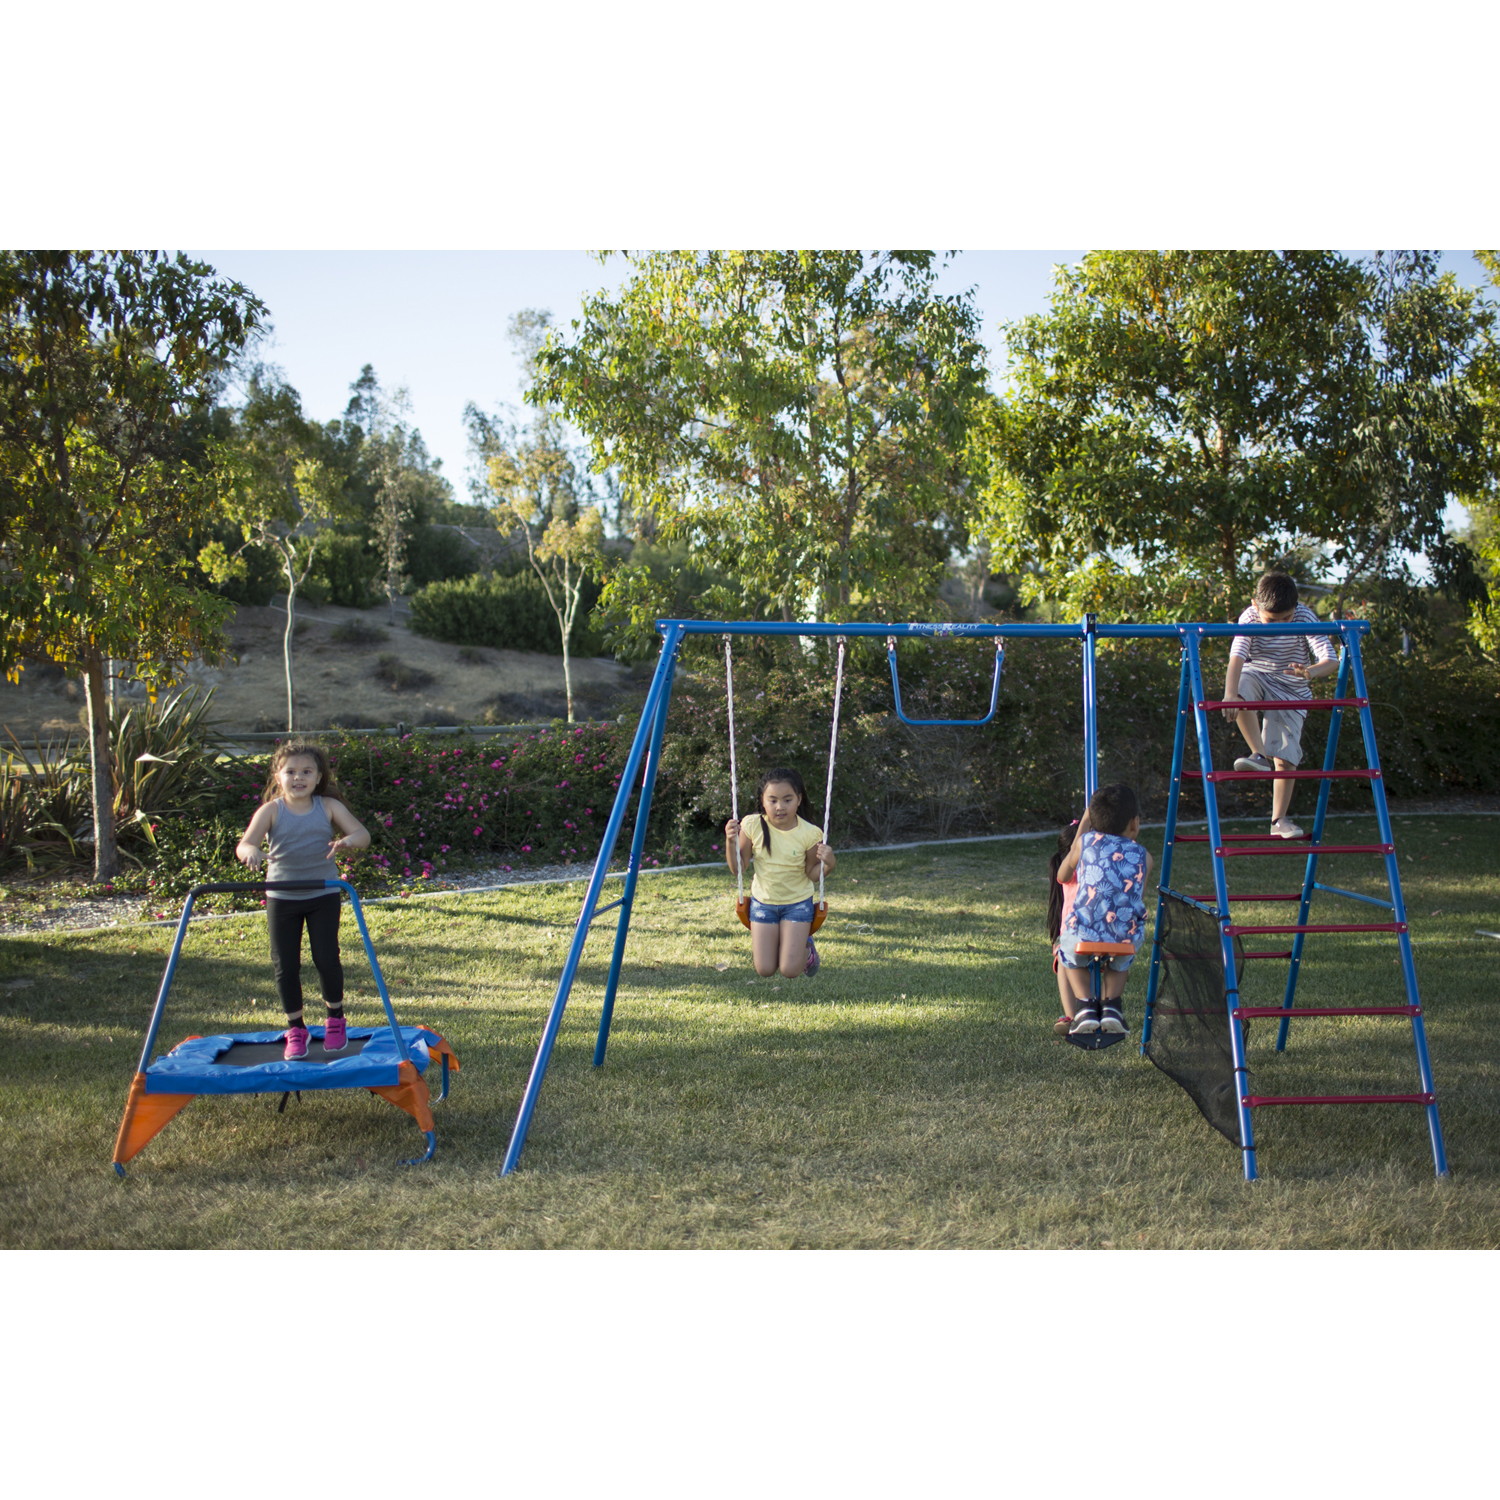 FITNESS REALITY KIDS Fun Series Metal Swing Set with Trampoline and Ladder Climber